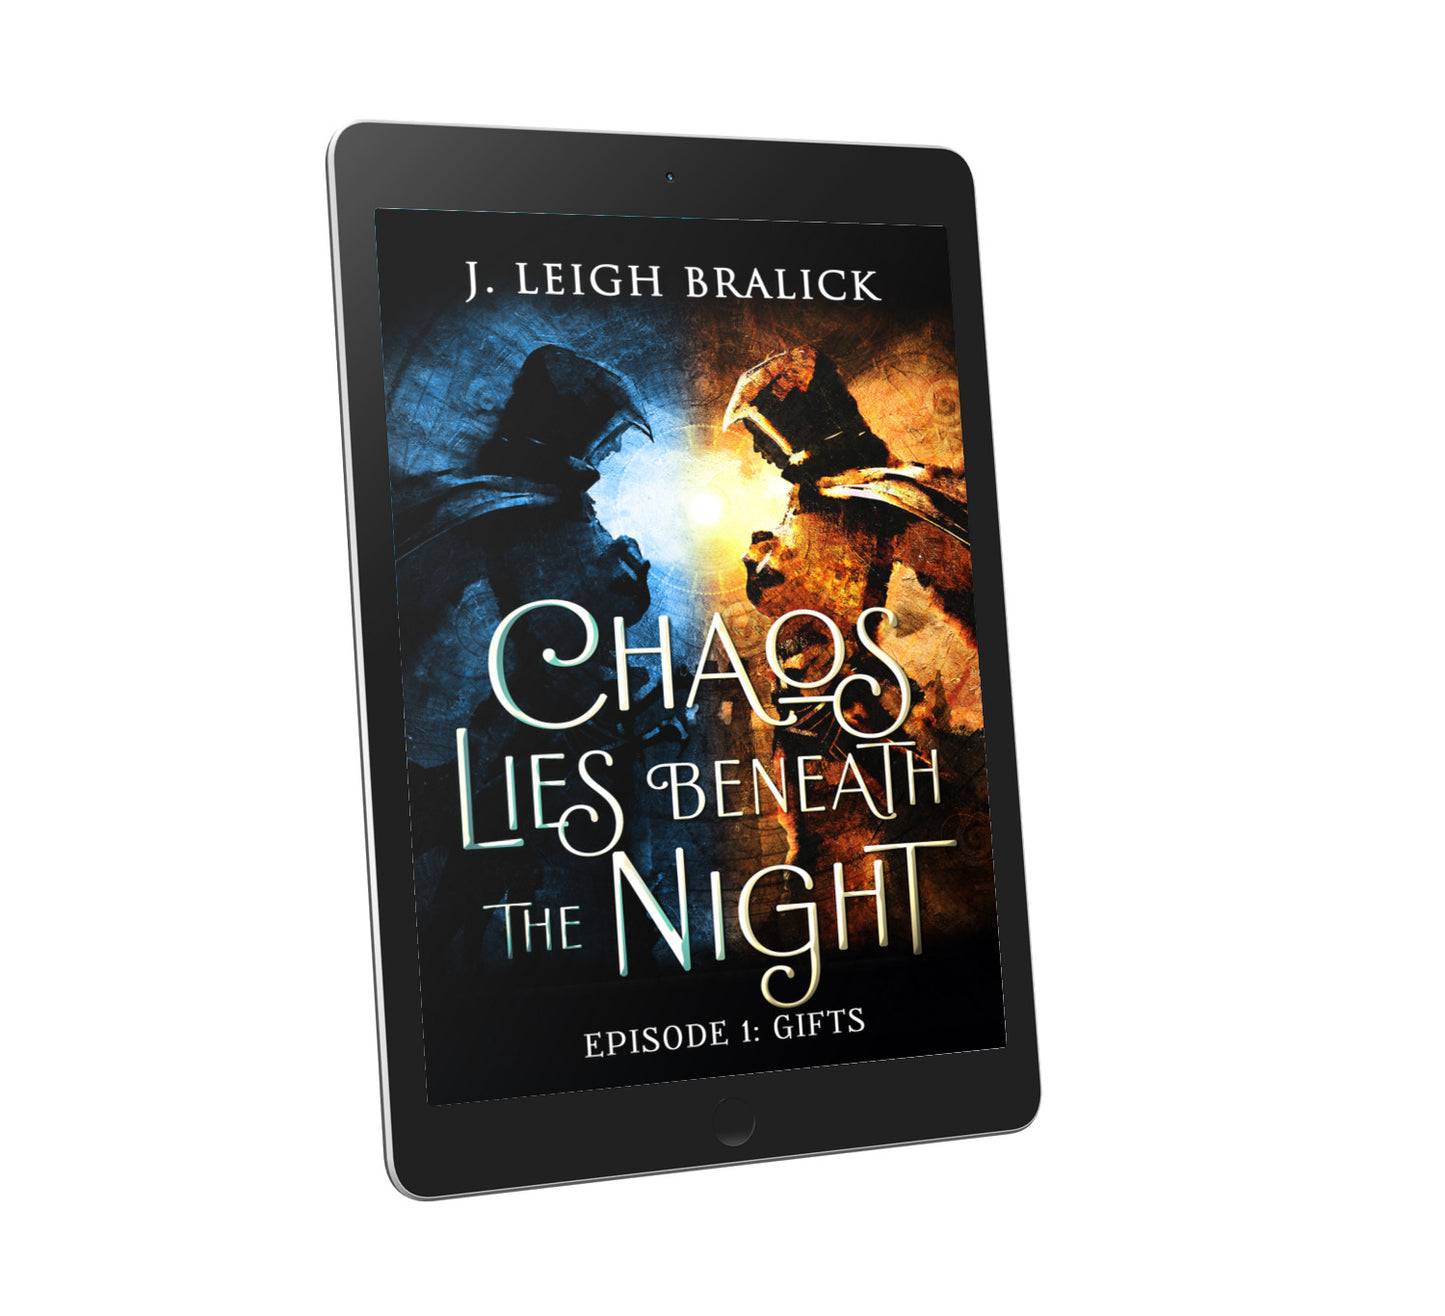 Chaos Lies Beneath the Night, Episode 1: Gifts - Ebook